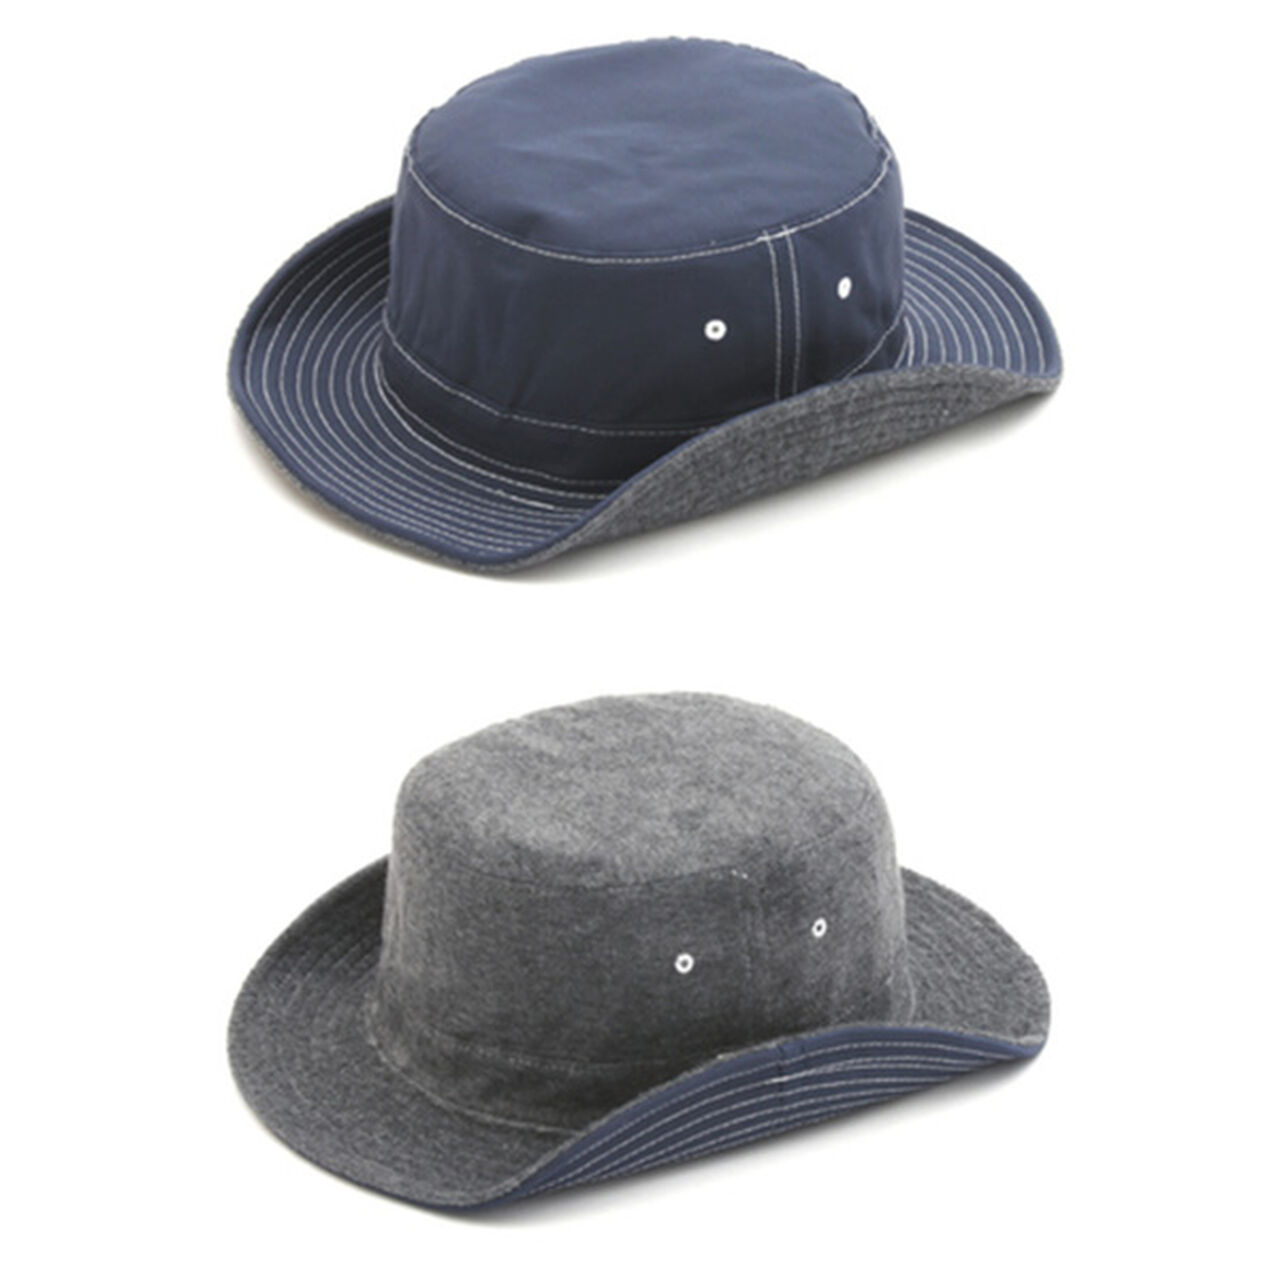 Reversible 60/40 Hat,Midnight_CharcoalGrey, large image number 0